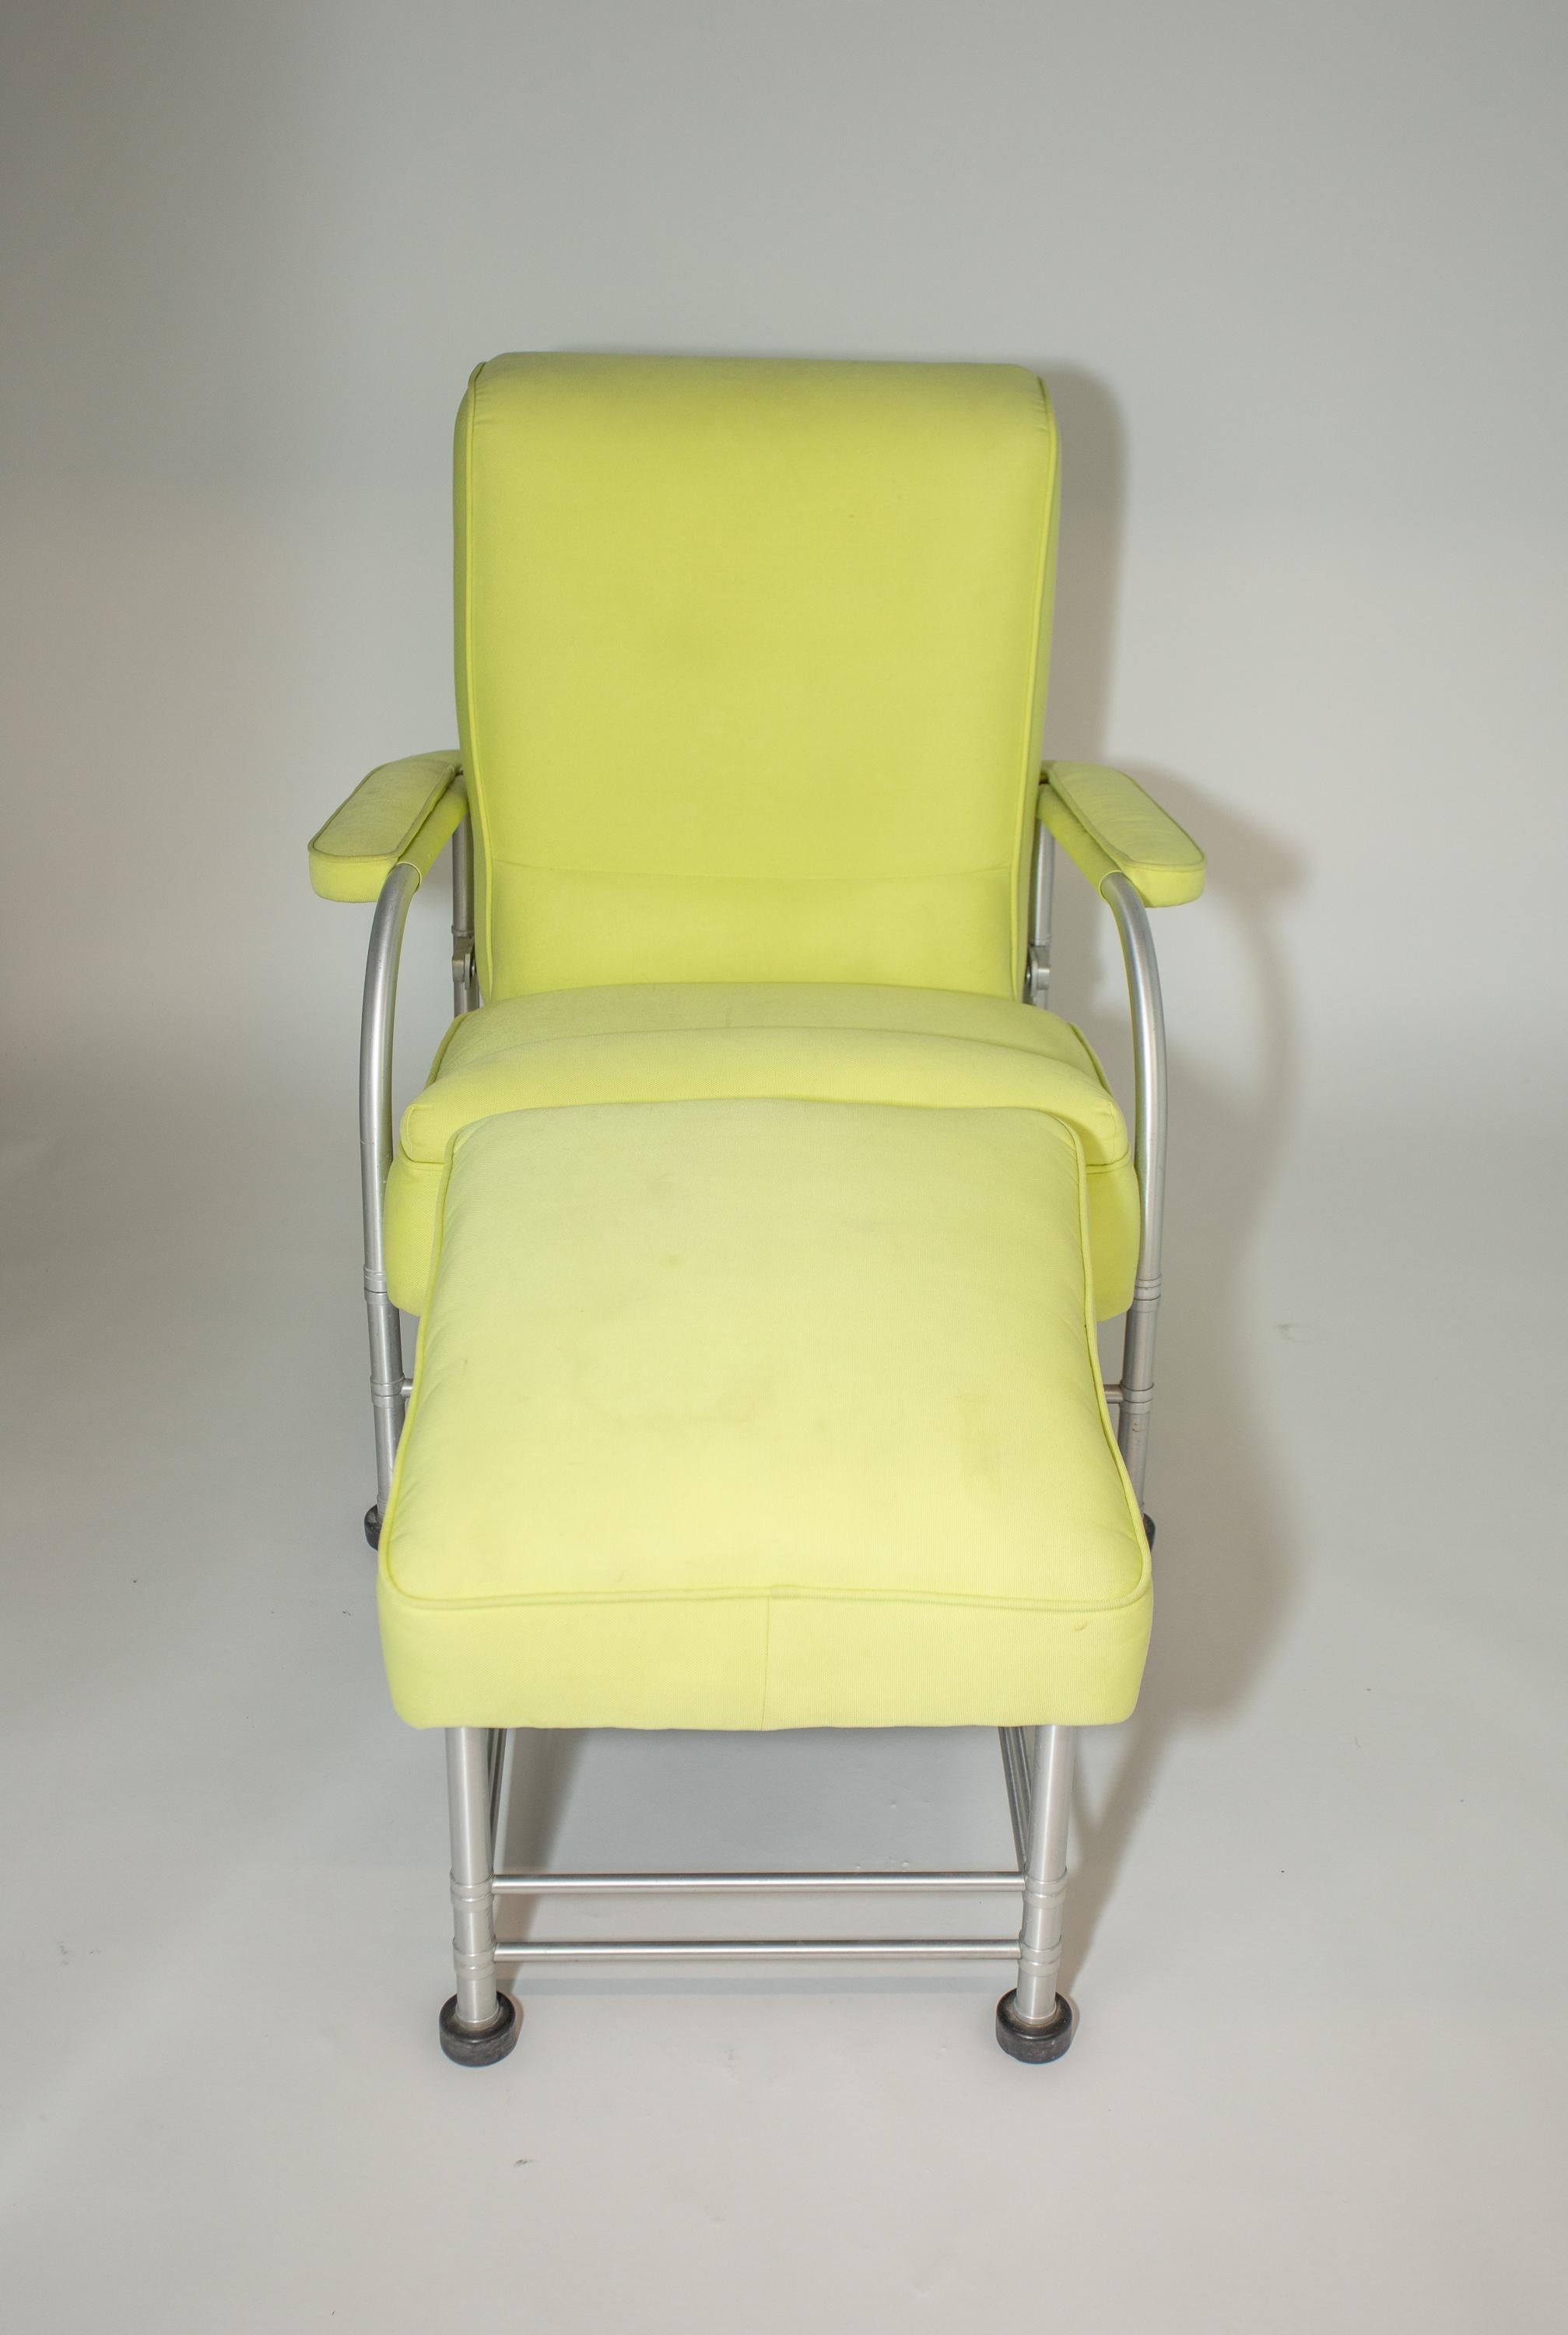 A seldom seen form
Both the lounge chair and Footstool are adjustable.
The lounge adjusts from upright to flat
Decal Label present
re-upholstered in yellow cotton